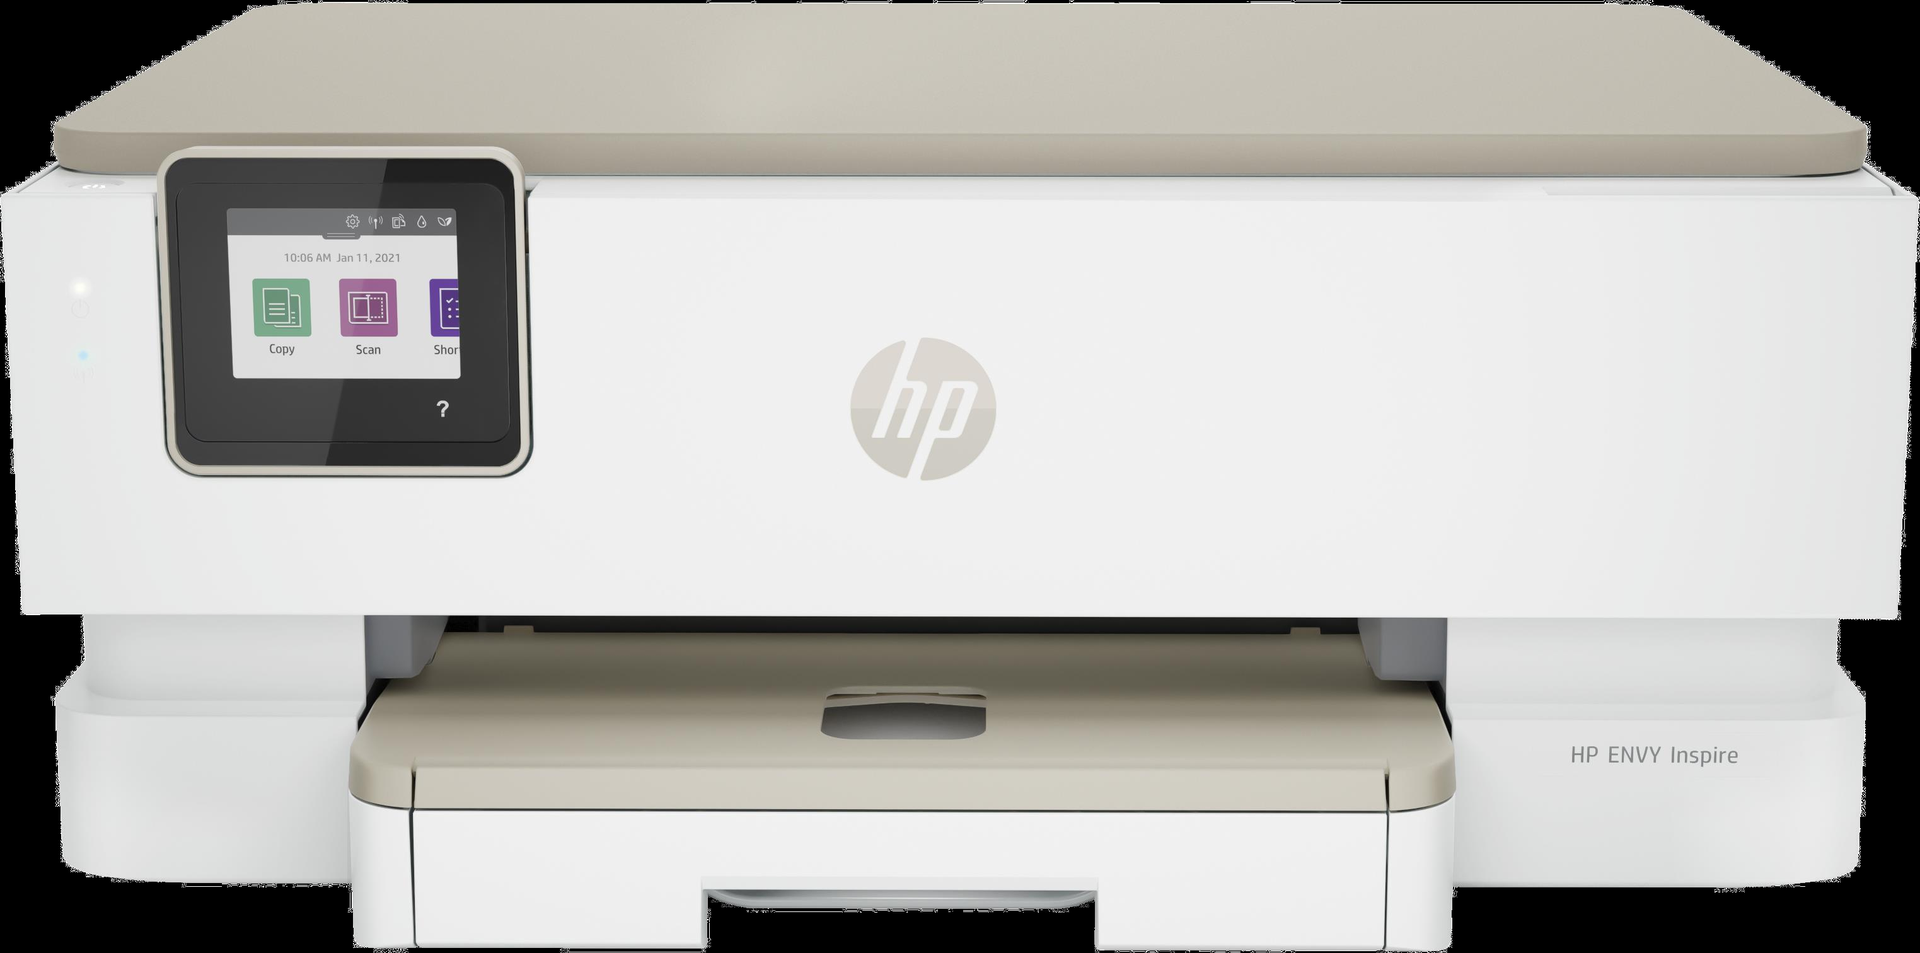 HP Envy Inspire 7220e All-in-One A4 Color Inkjet 10ppm Print Scan Copy Photo Printer (242P6B#629)